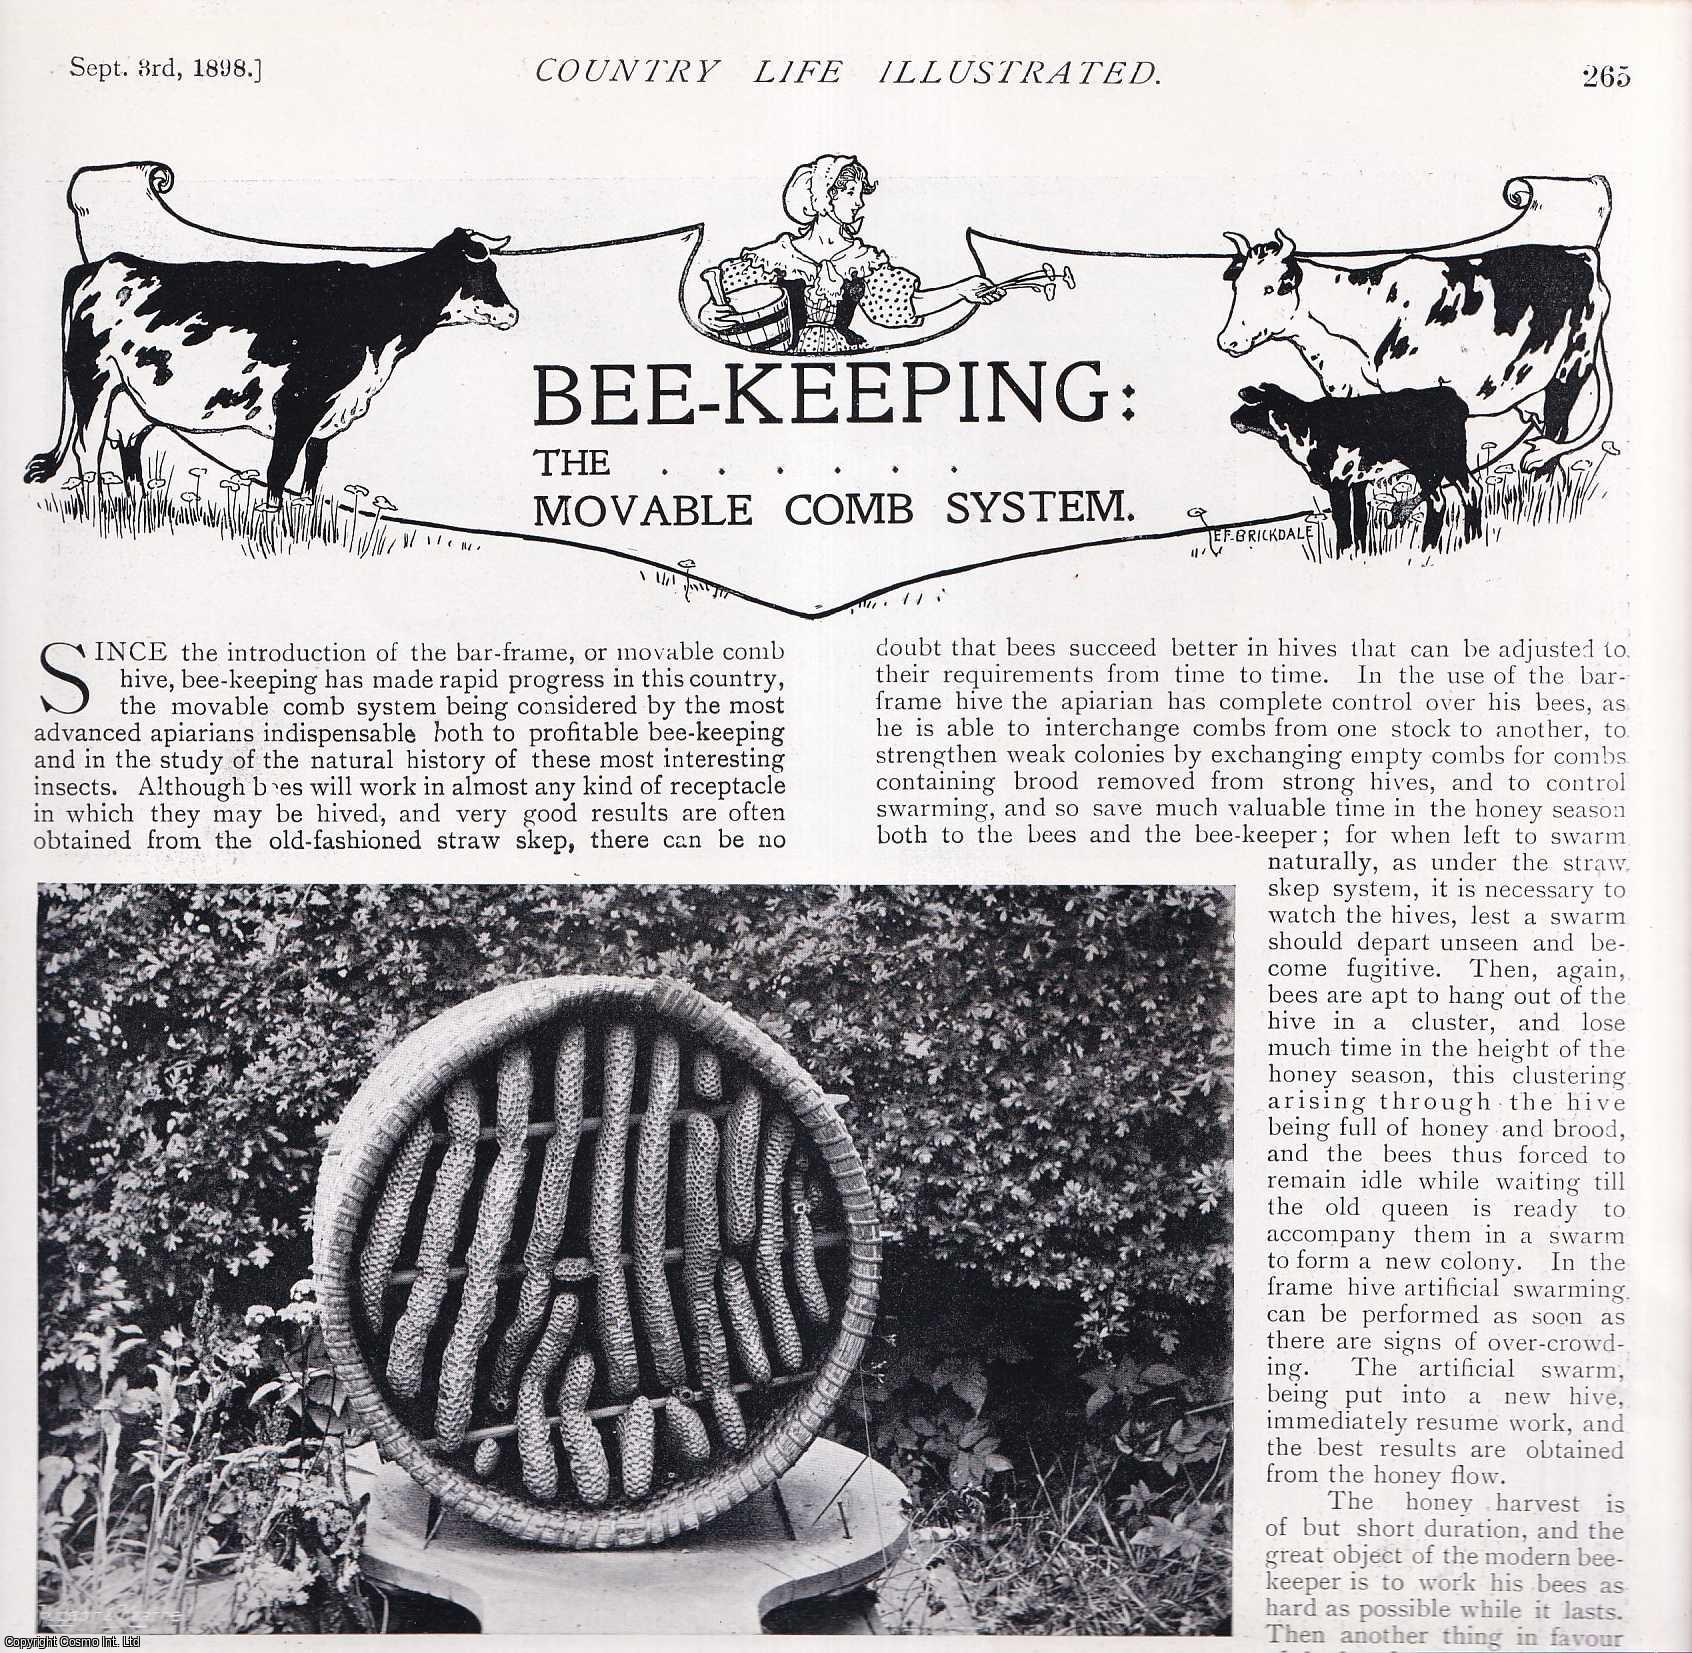 COUNTRY LIFE - Bee-Keeping: The Movable Comb System. Several pictures and accompanying text, removed from an original issue of Country Life Magazine, 1898.